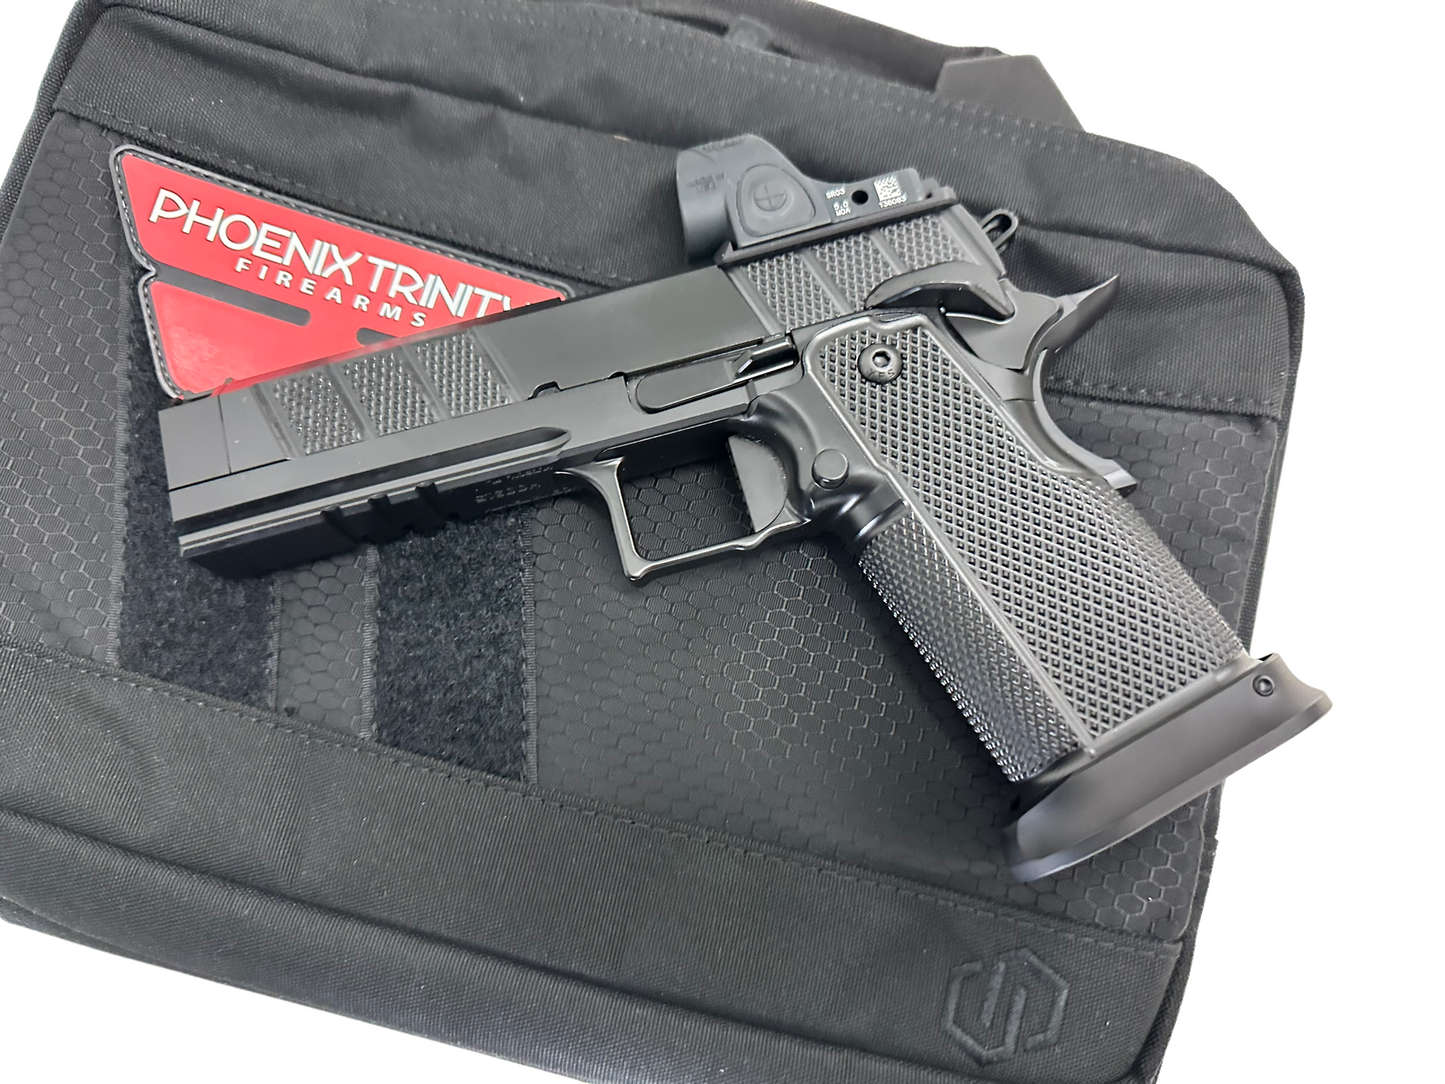 PHOENIX TRINITY H PRO 9MM DOUBLE STACK BLACK WITH SS COMP’D AND TRIJICON SRO